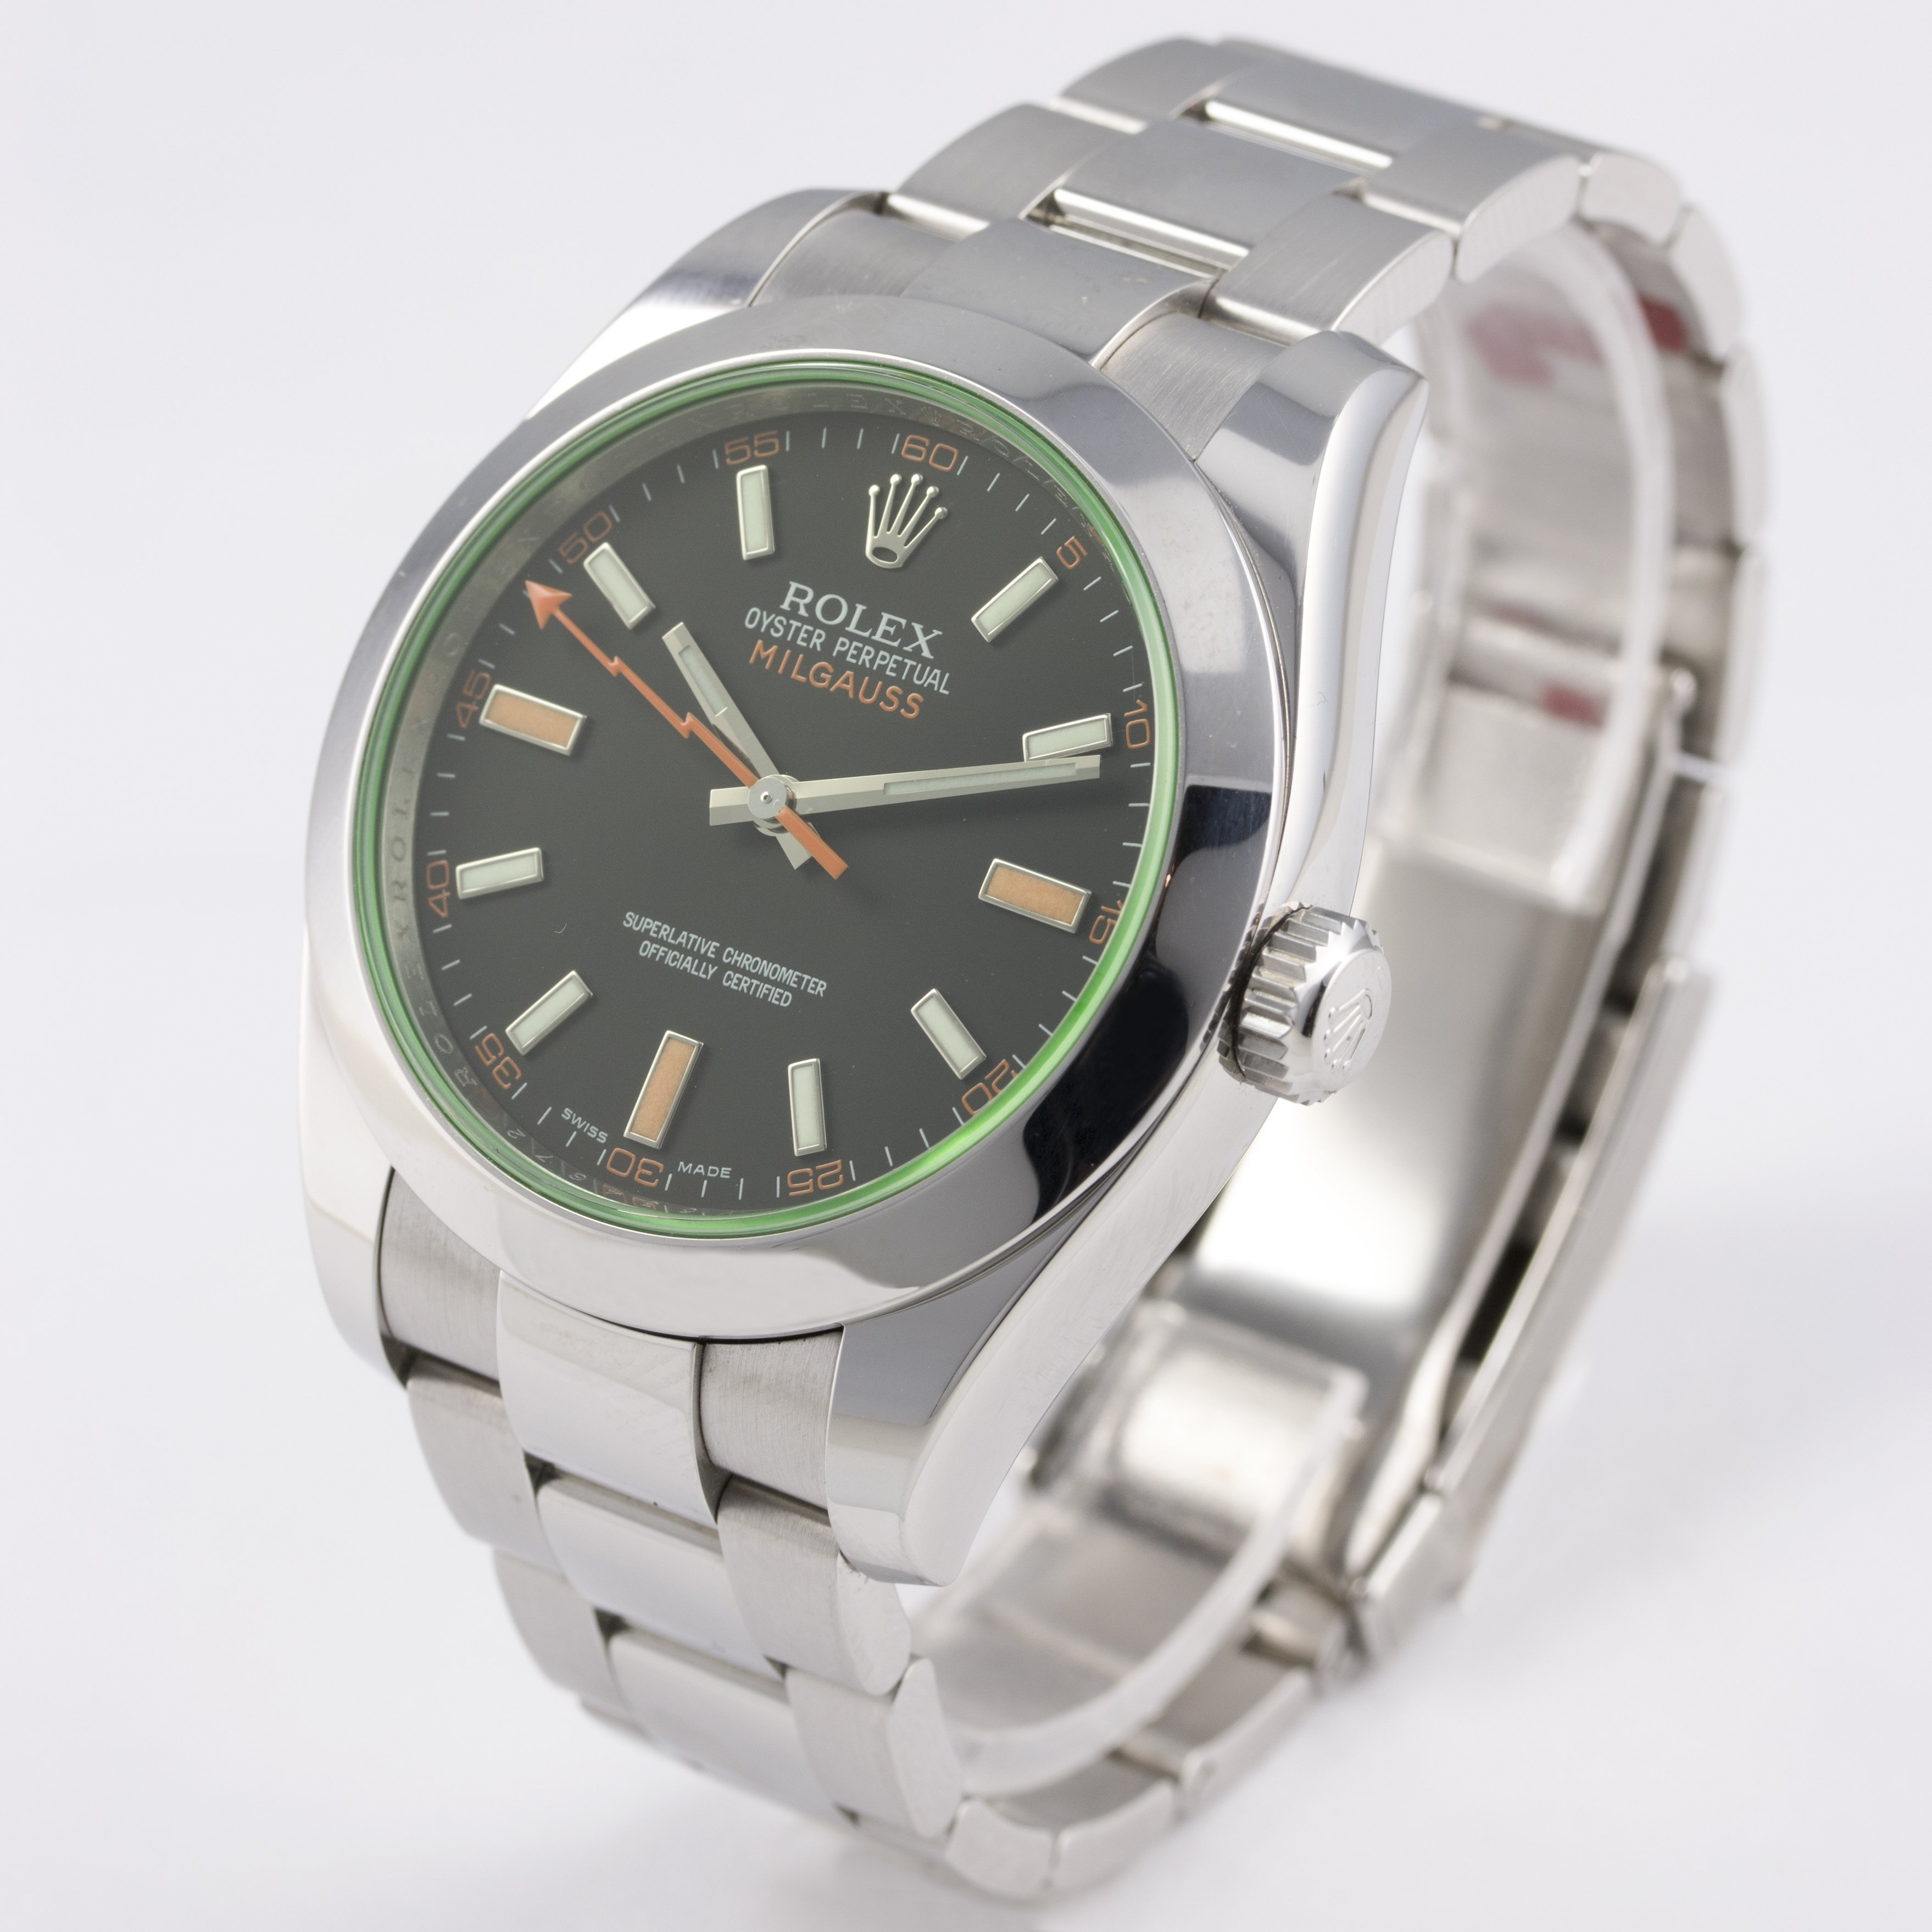 A GENTLEMAN'S STAINLESS STEEL ROLEX OYSTER PERPETUAL "GREEN GLASS" MILGAUSS BRACELET WATCH DATED - Image 3 of 6